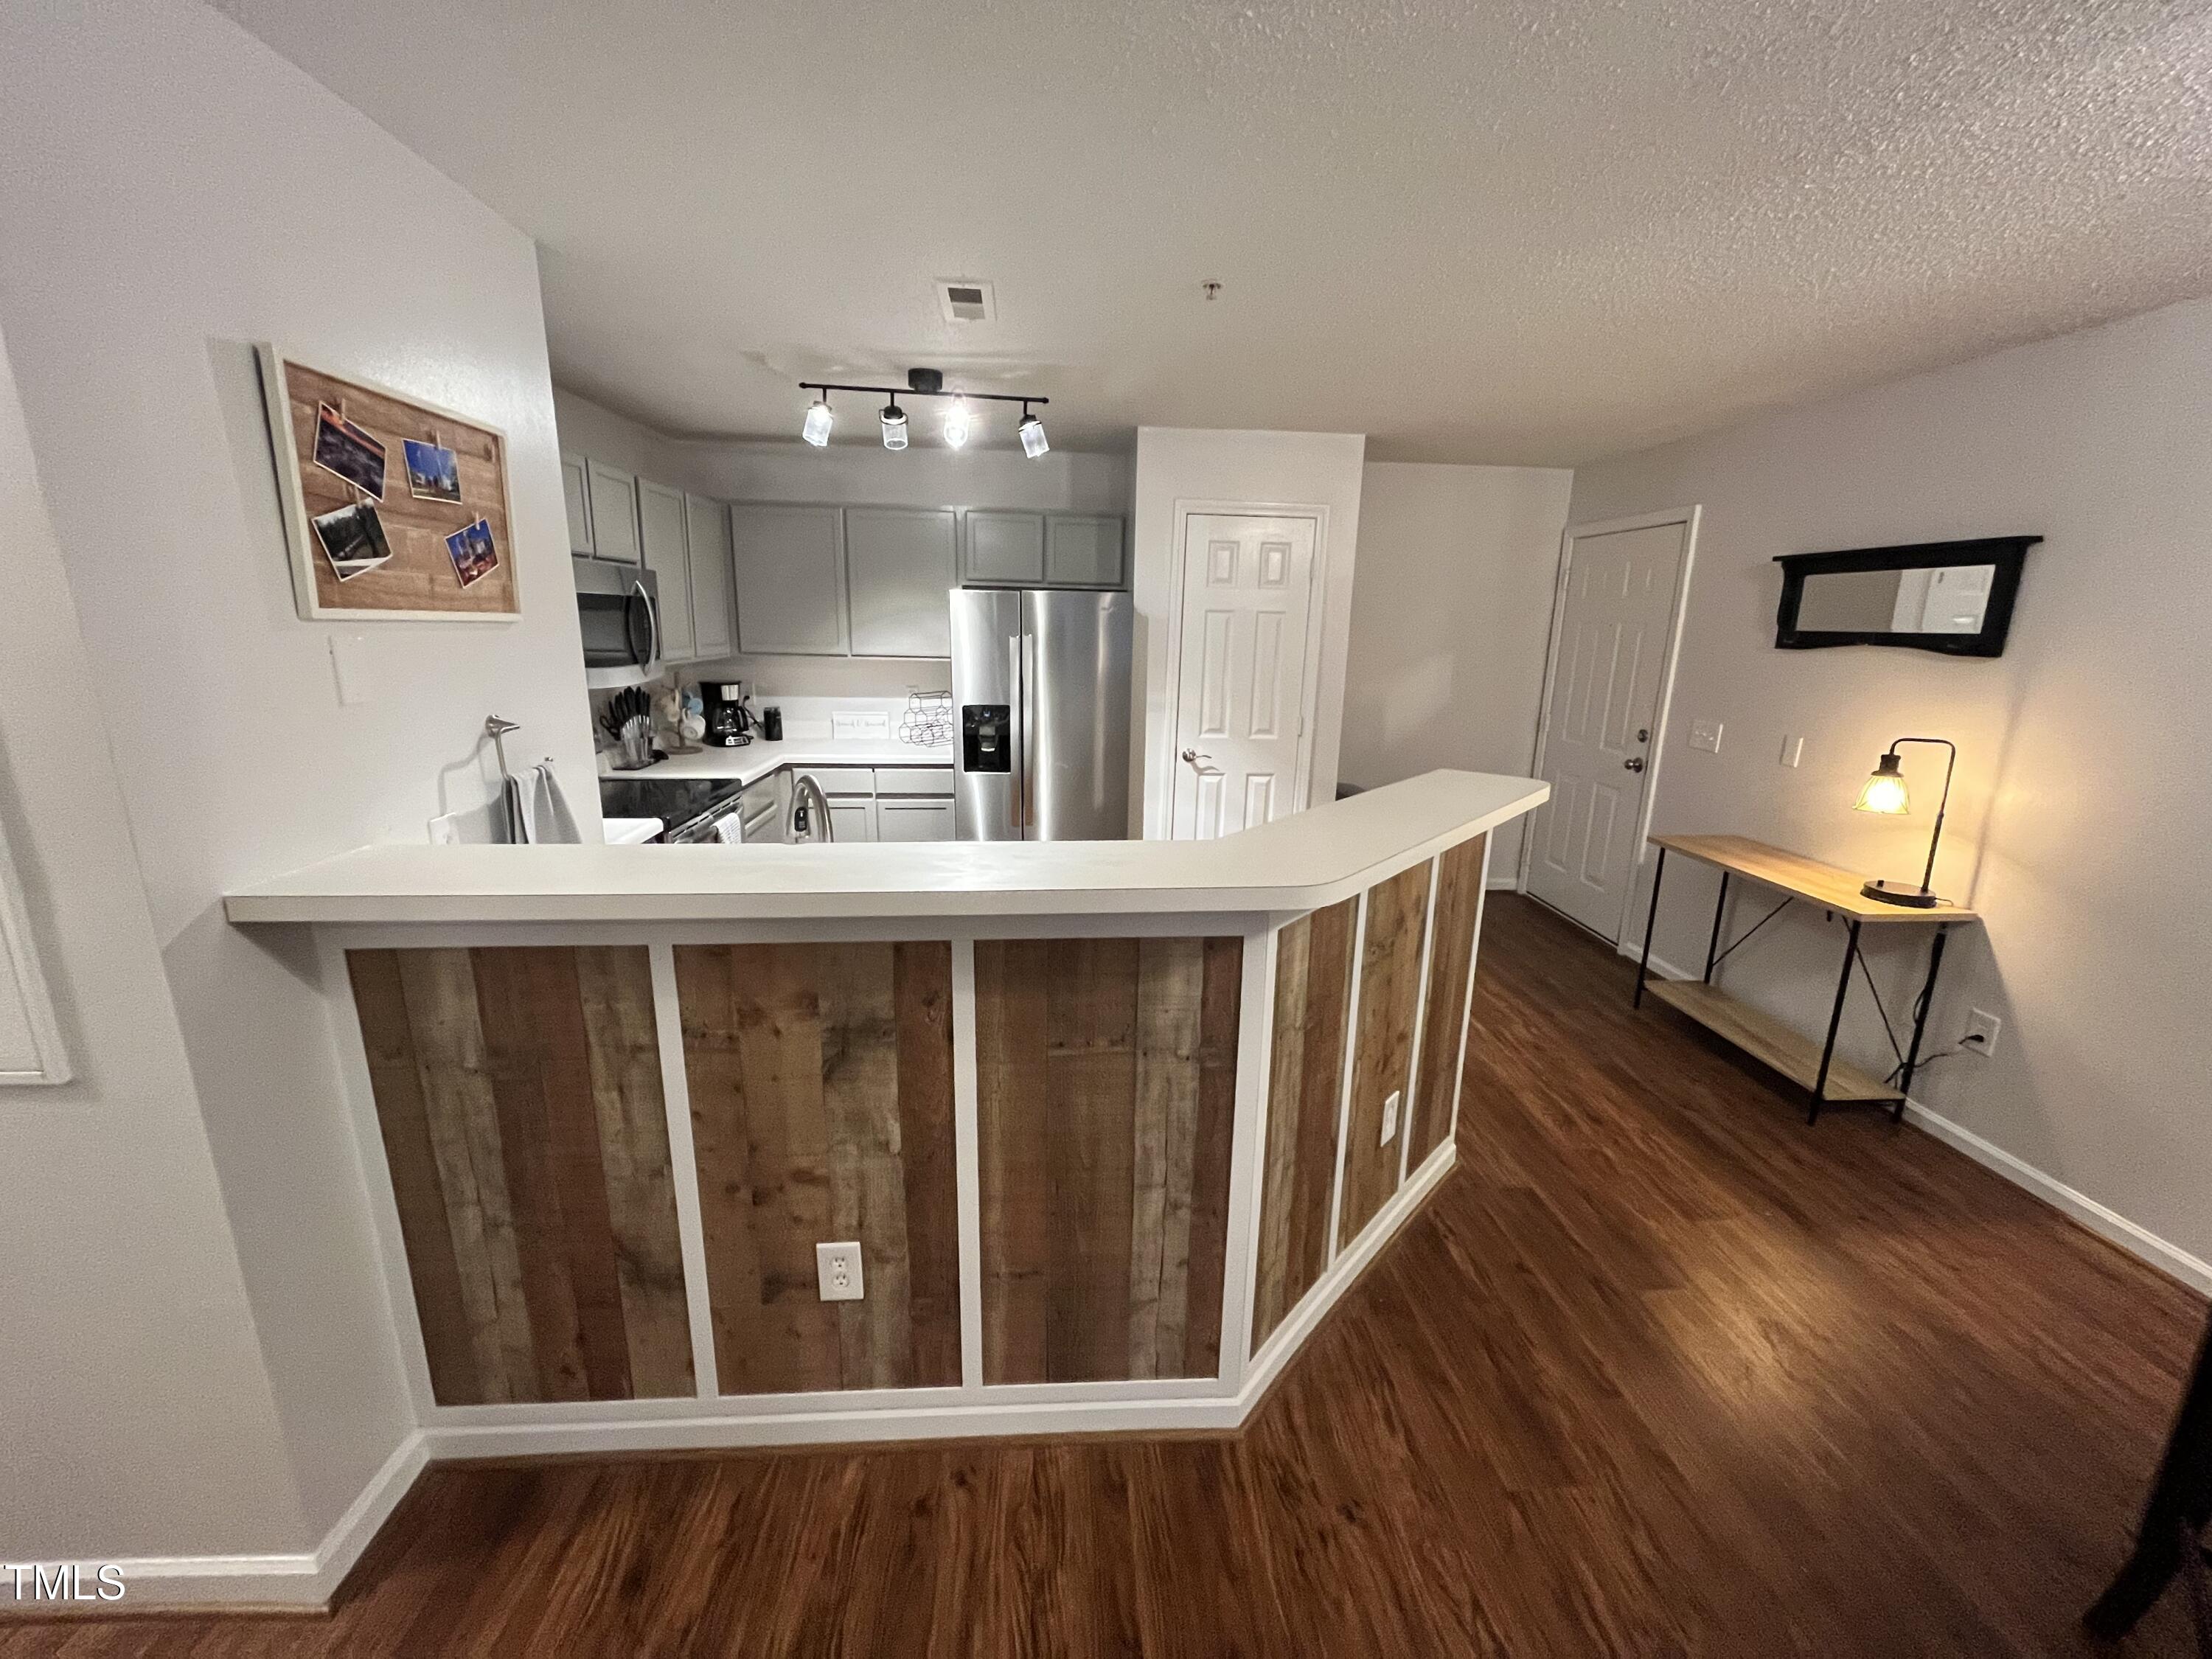 a room with stainless steel appliances a kitchen island hardwood floor and a living room